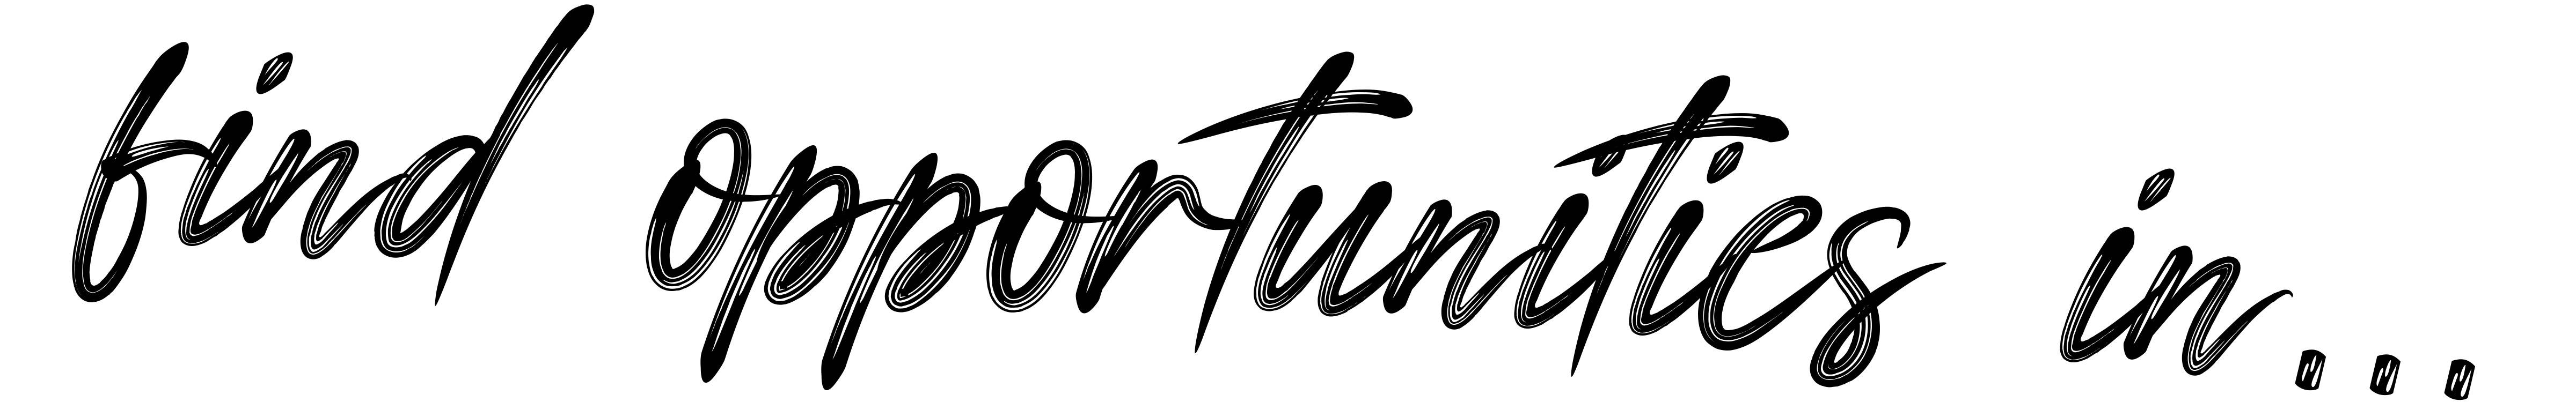 "Find Opportunities" heading in a swooshy font type